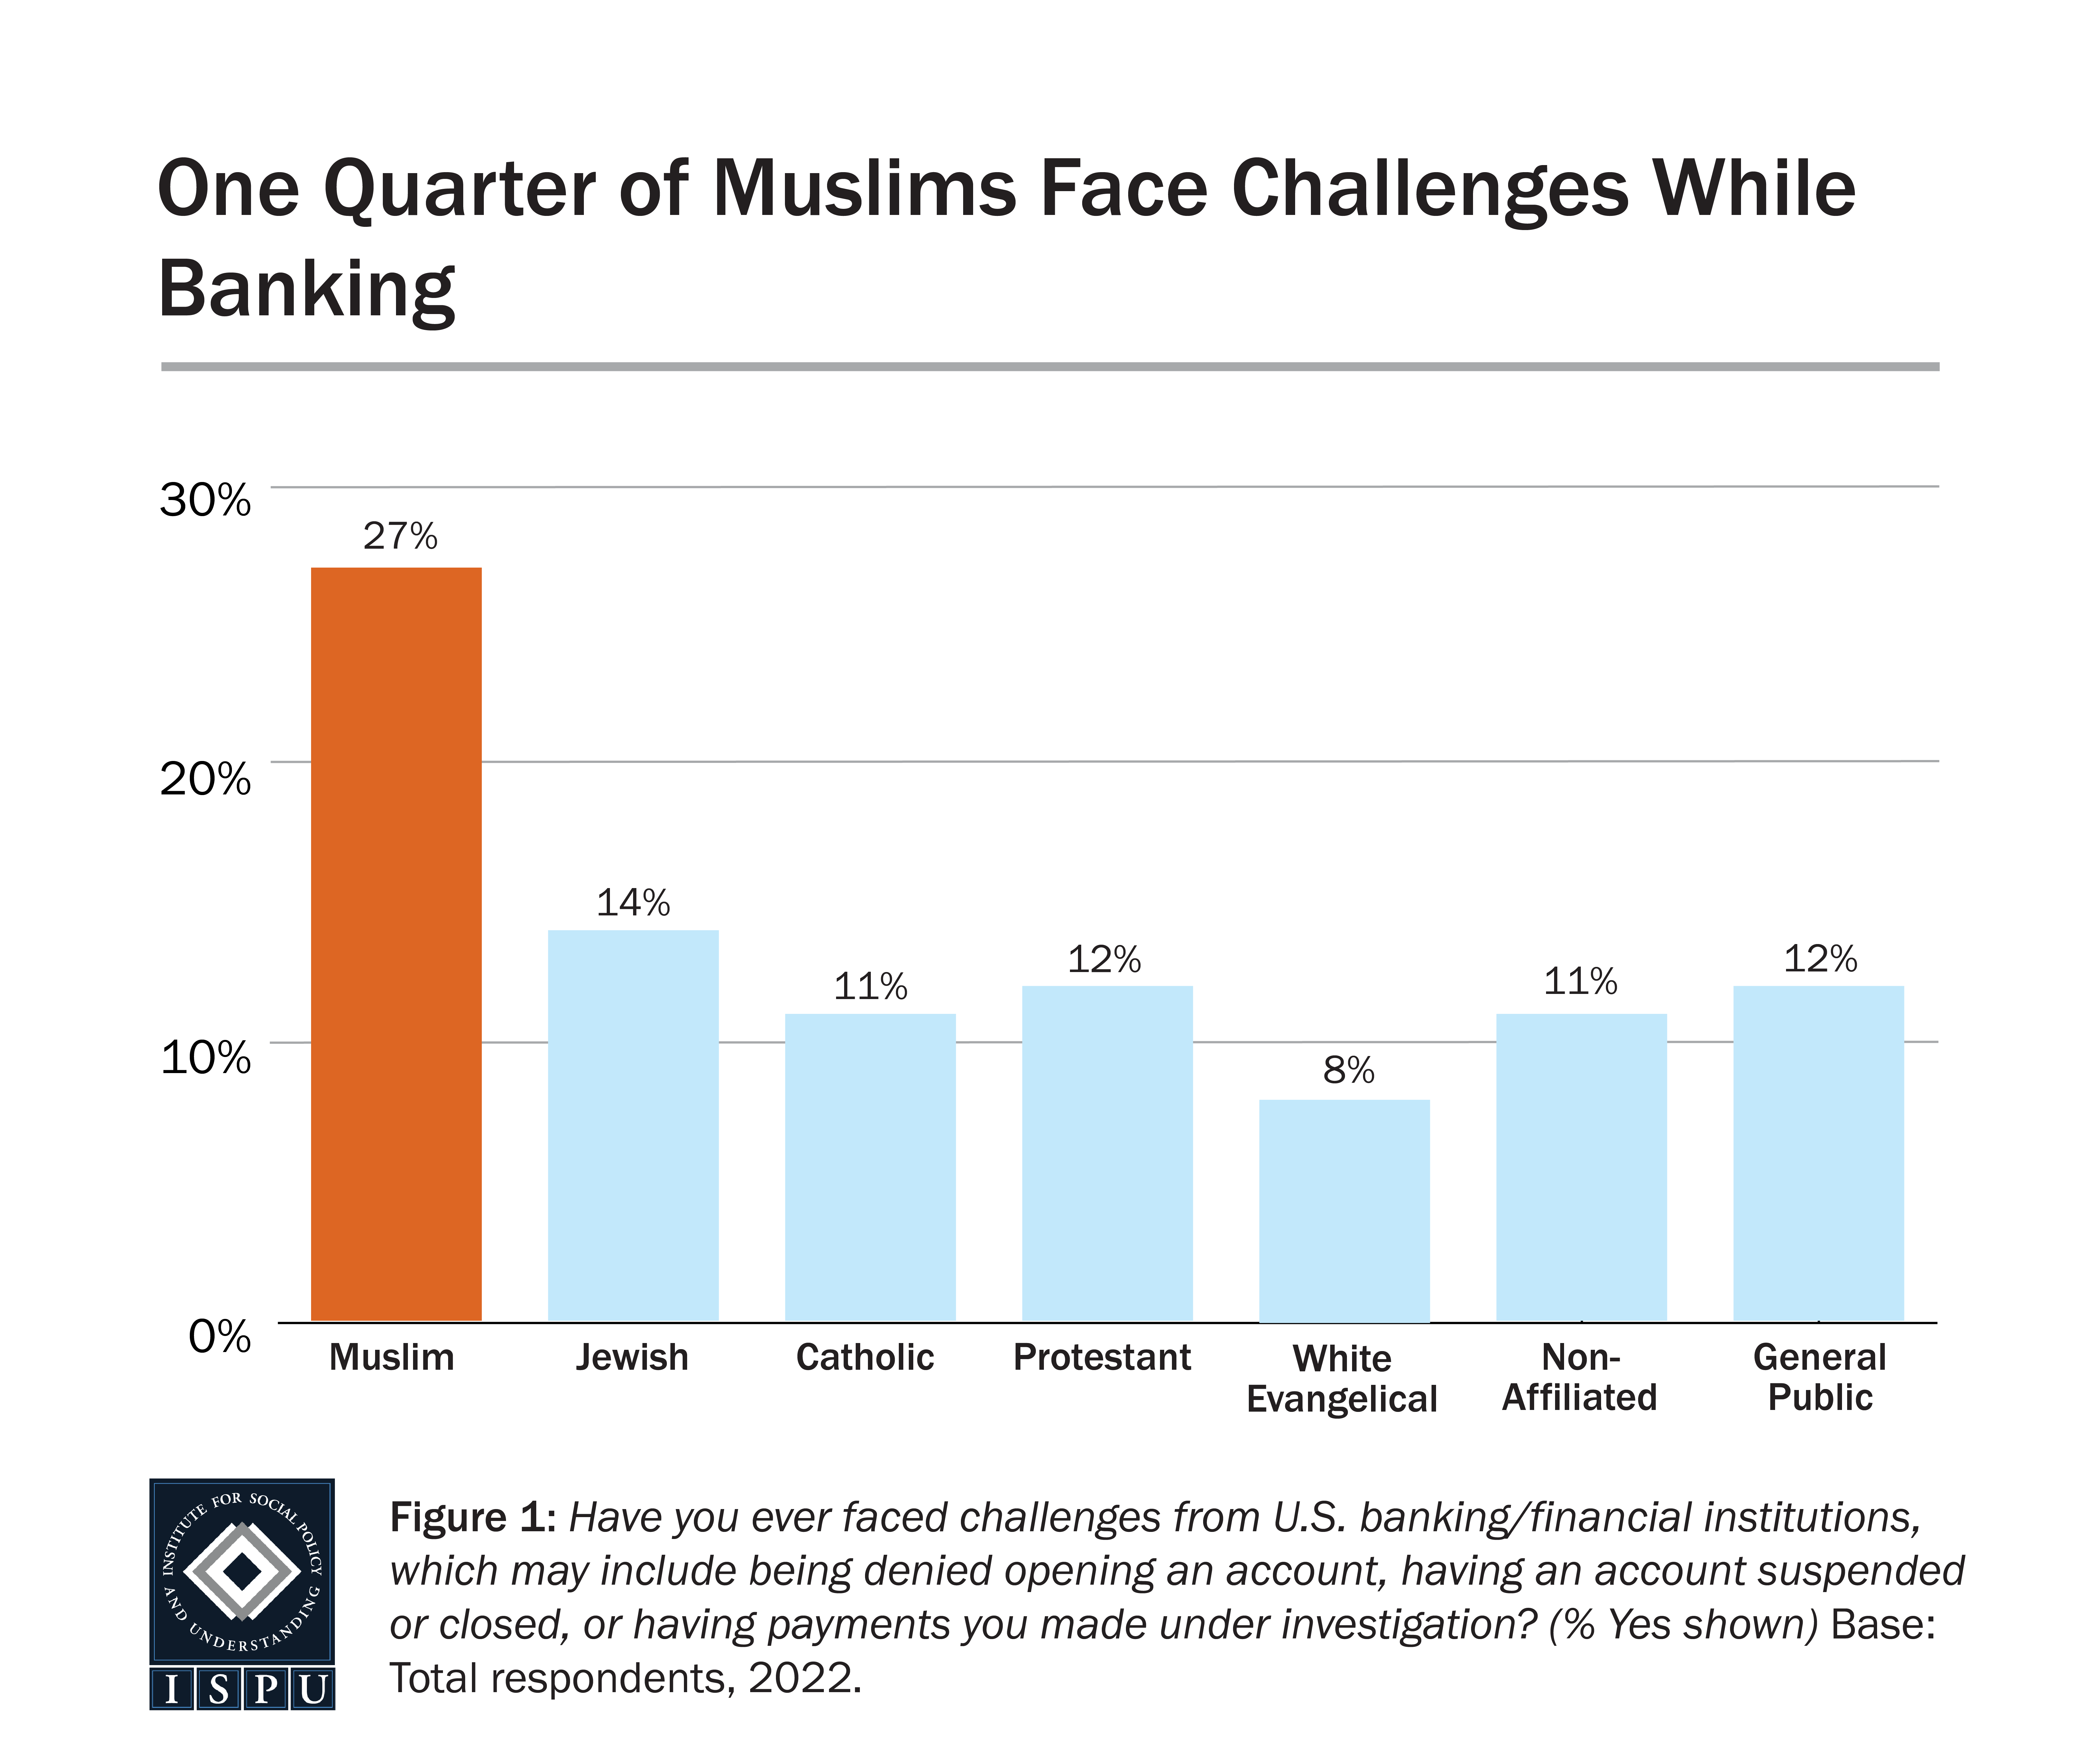 A bar graph showing that Muslims are more likely than other faith and non-faith groups to face challenges while banking.